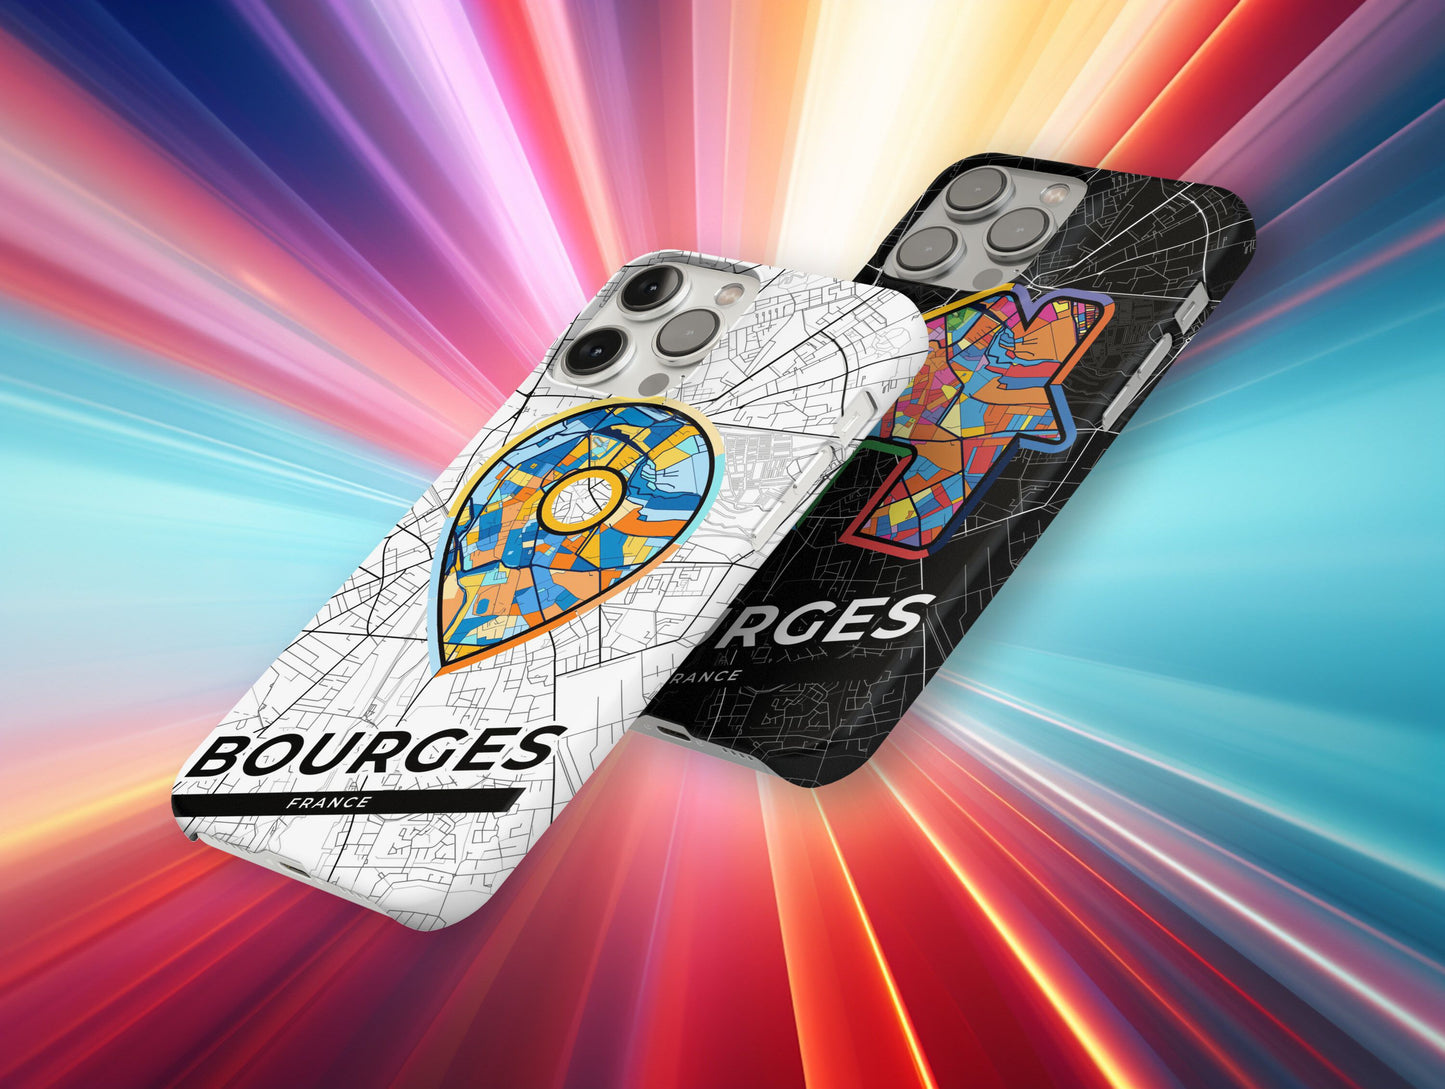 Bourges France slim phone case with colorful icon. Birthday, wedding or housewarming gift. Couple match cases.